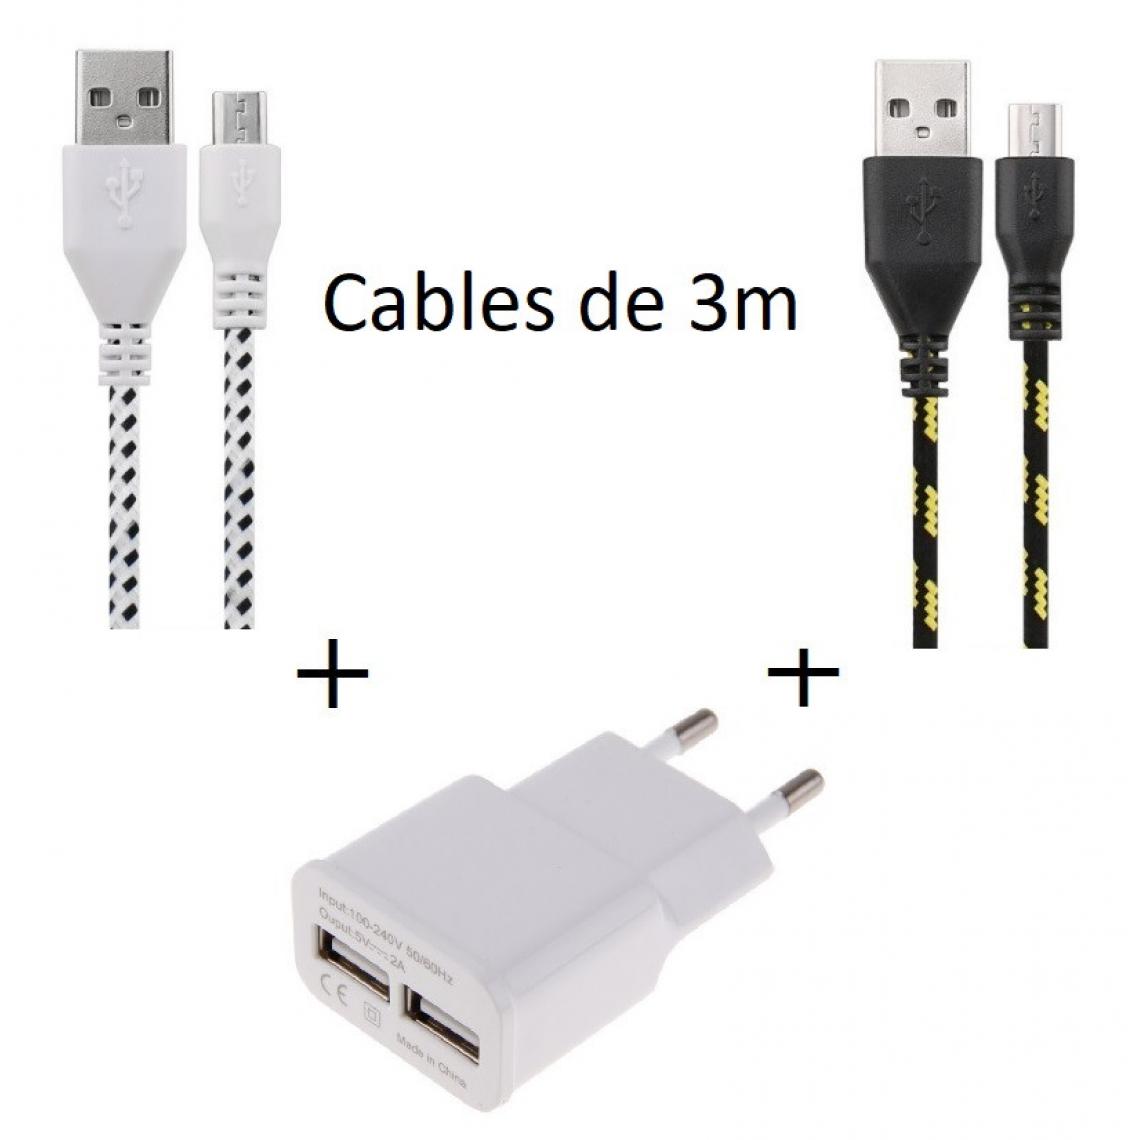 Shot - Pack Chargeur pour XIAOMI Redmi 7A Smartphone Android Micro USB (2 Cables Tresse 3m + Prise Secteur Double USB) - Chargeur secteur téléphone